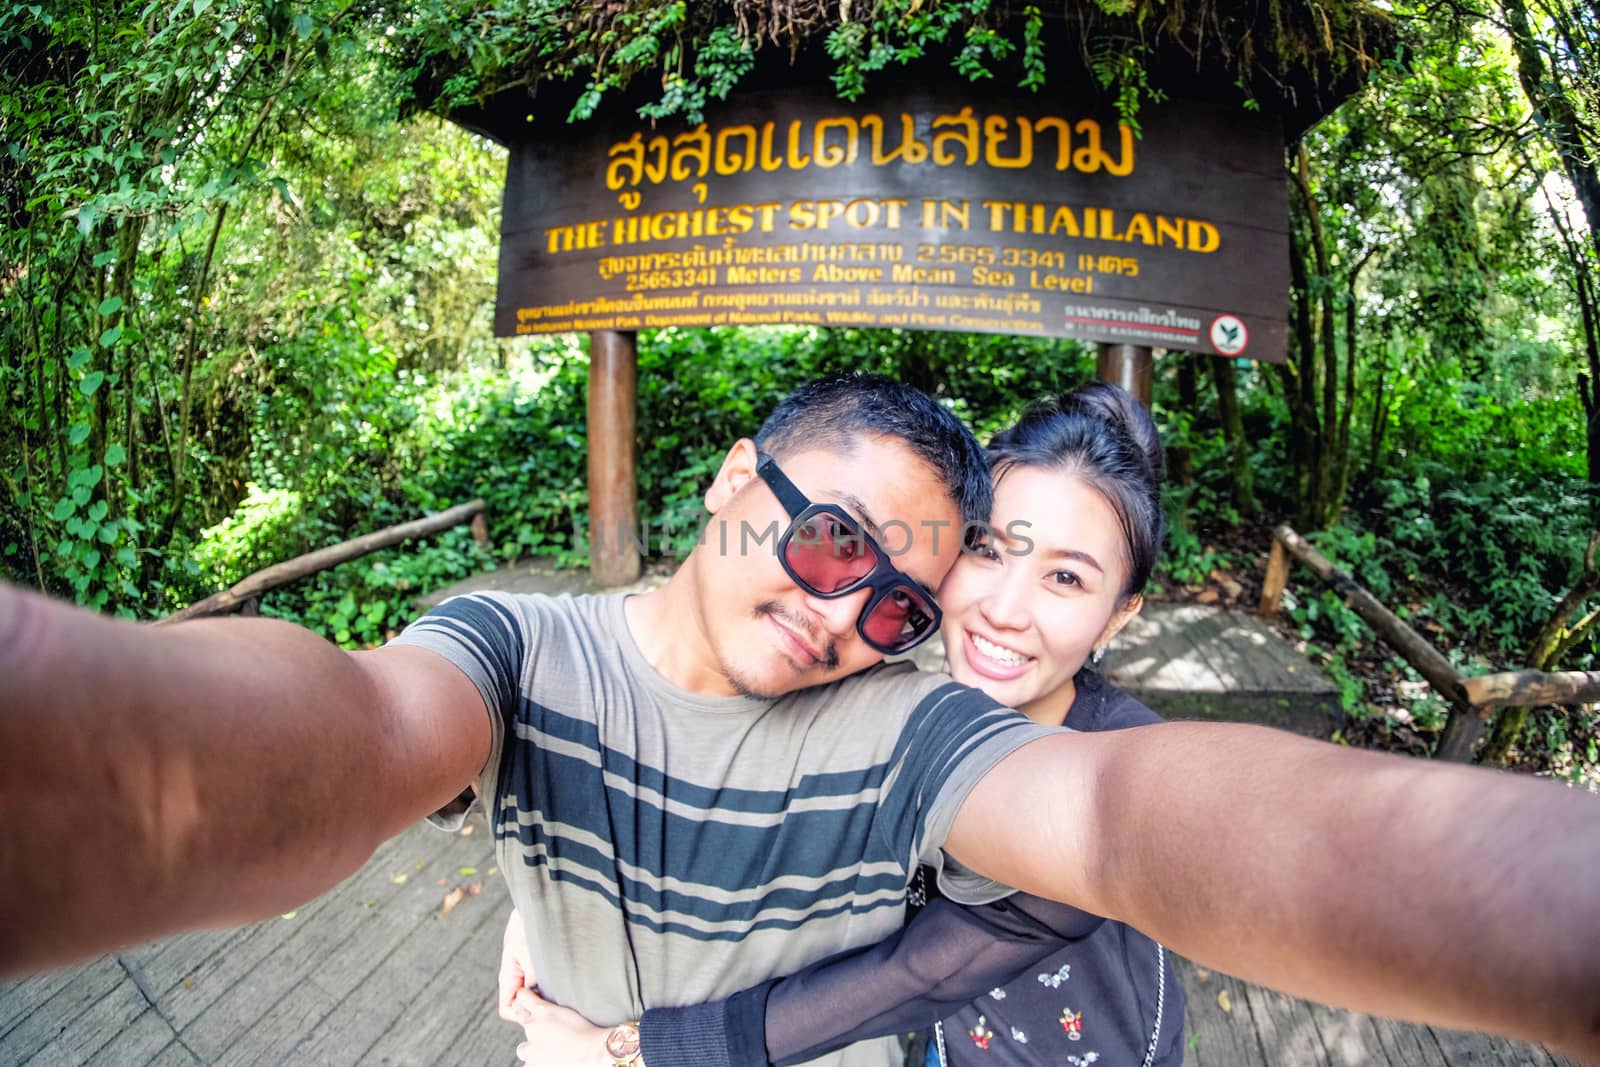 Couole love  selfie in Highest spot at Thailand by Surasak